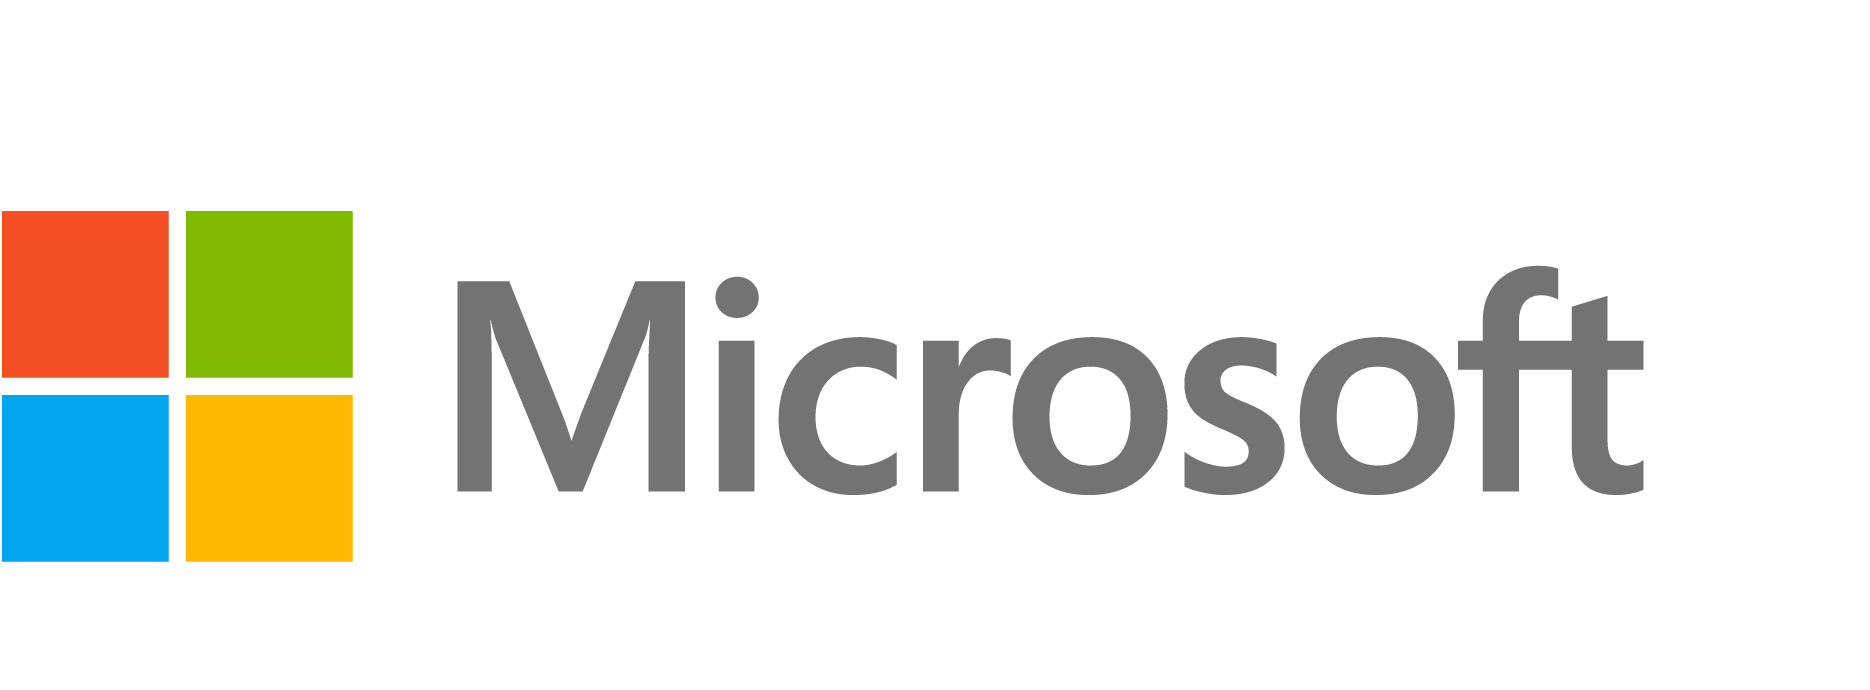 Msft Logo - Microsoft Build Shows A Very Intriguing Path - Microsoft Corporation ...